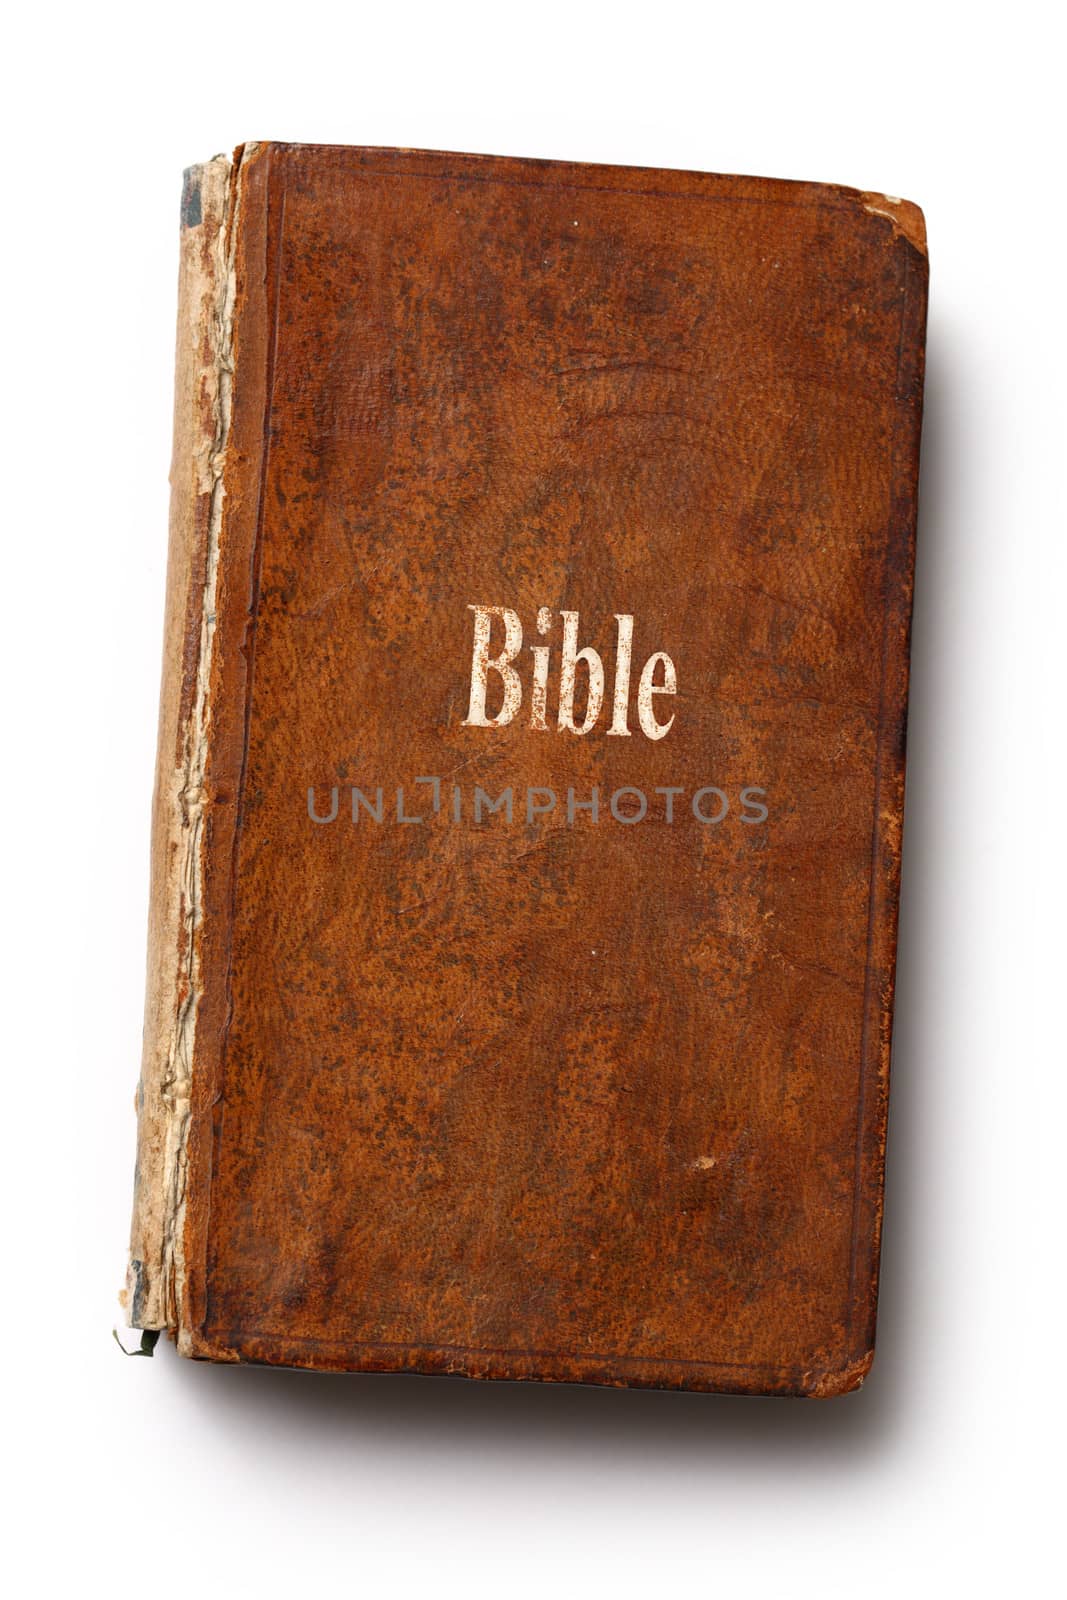 Old Bible book on white background by Garsya